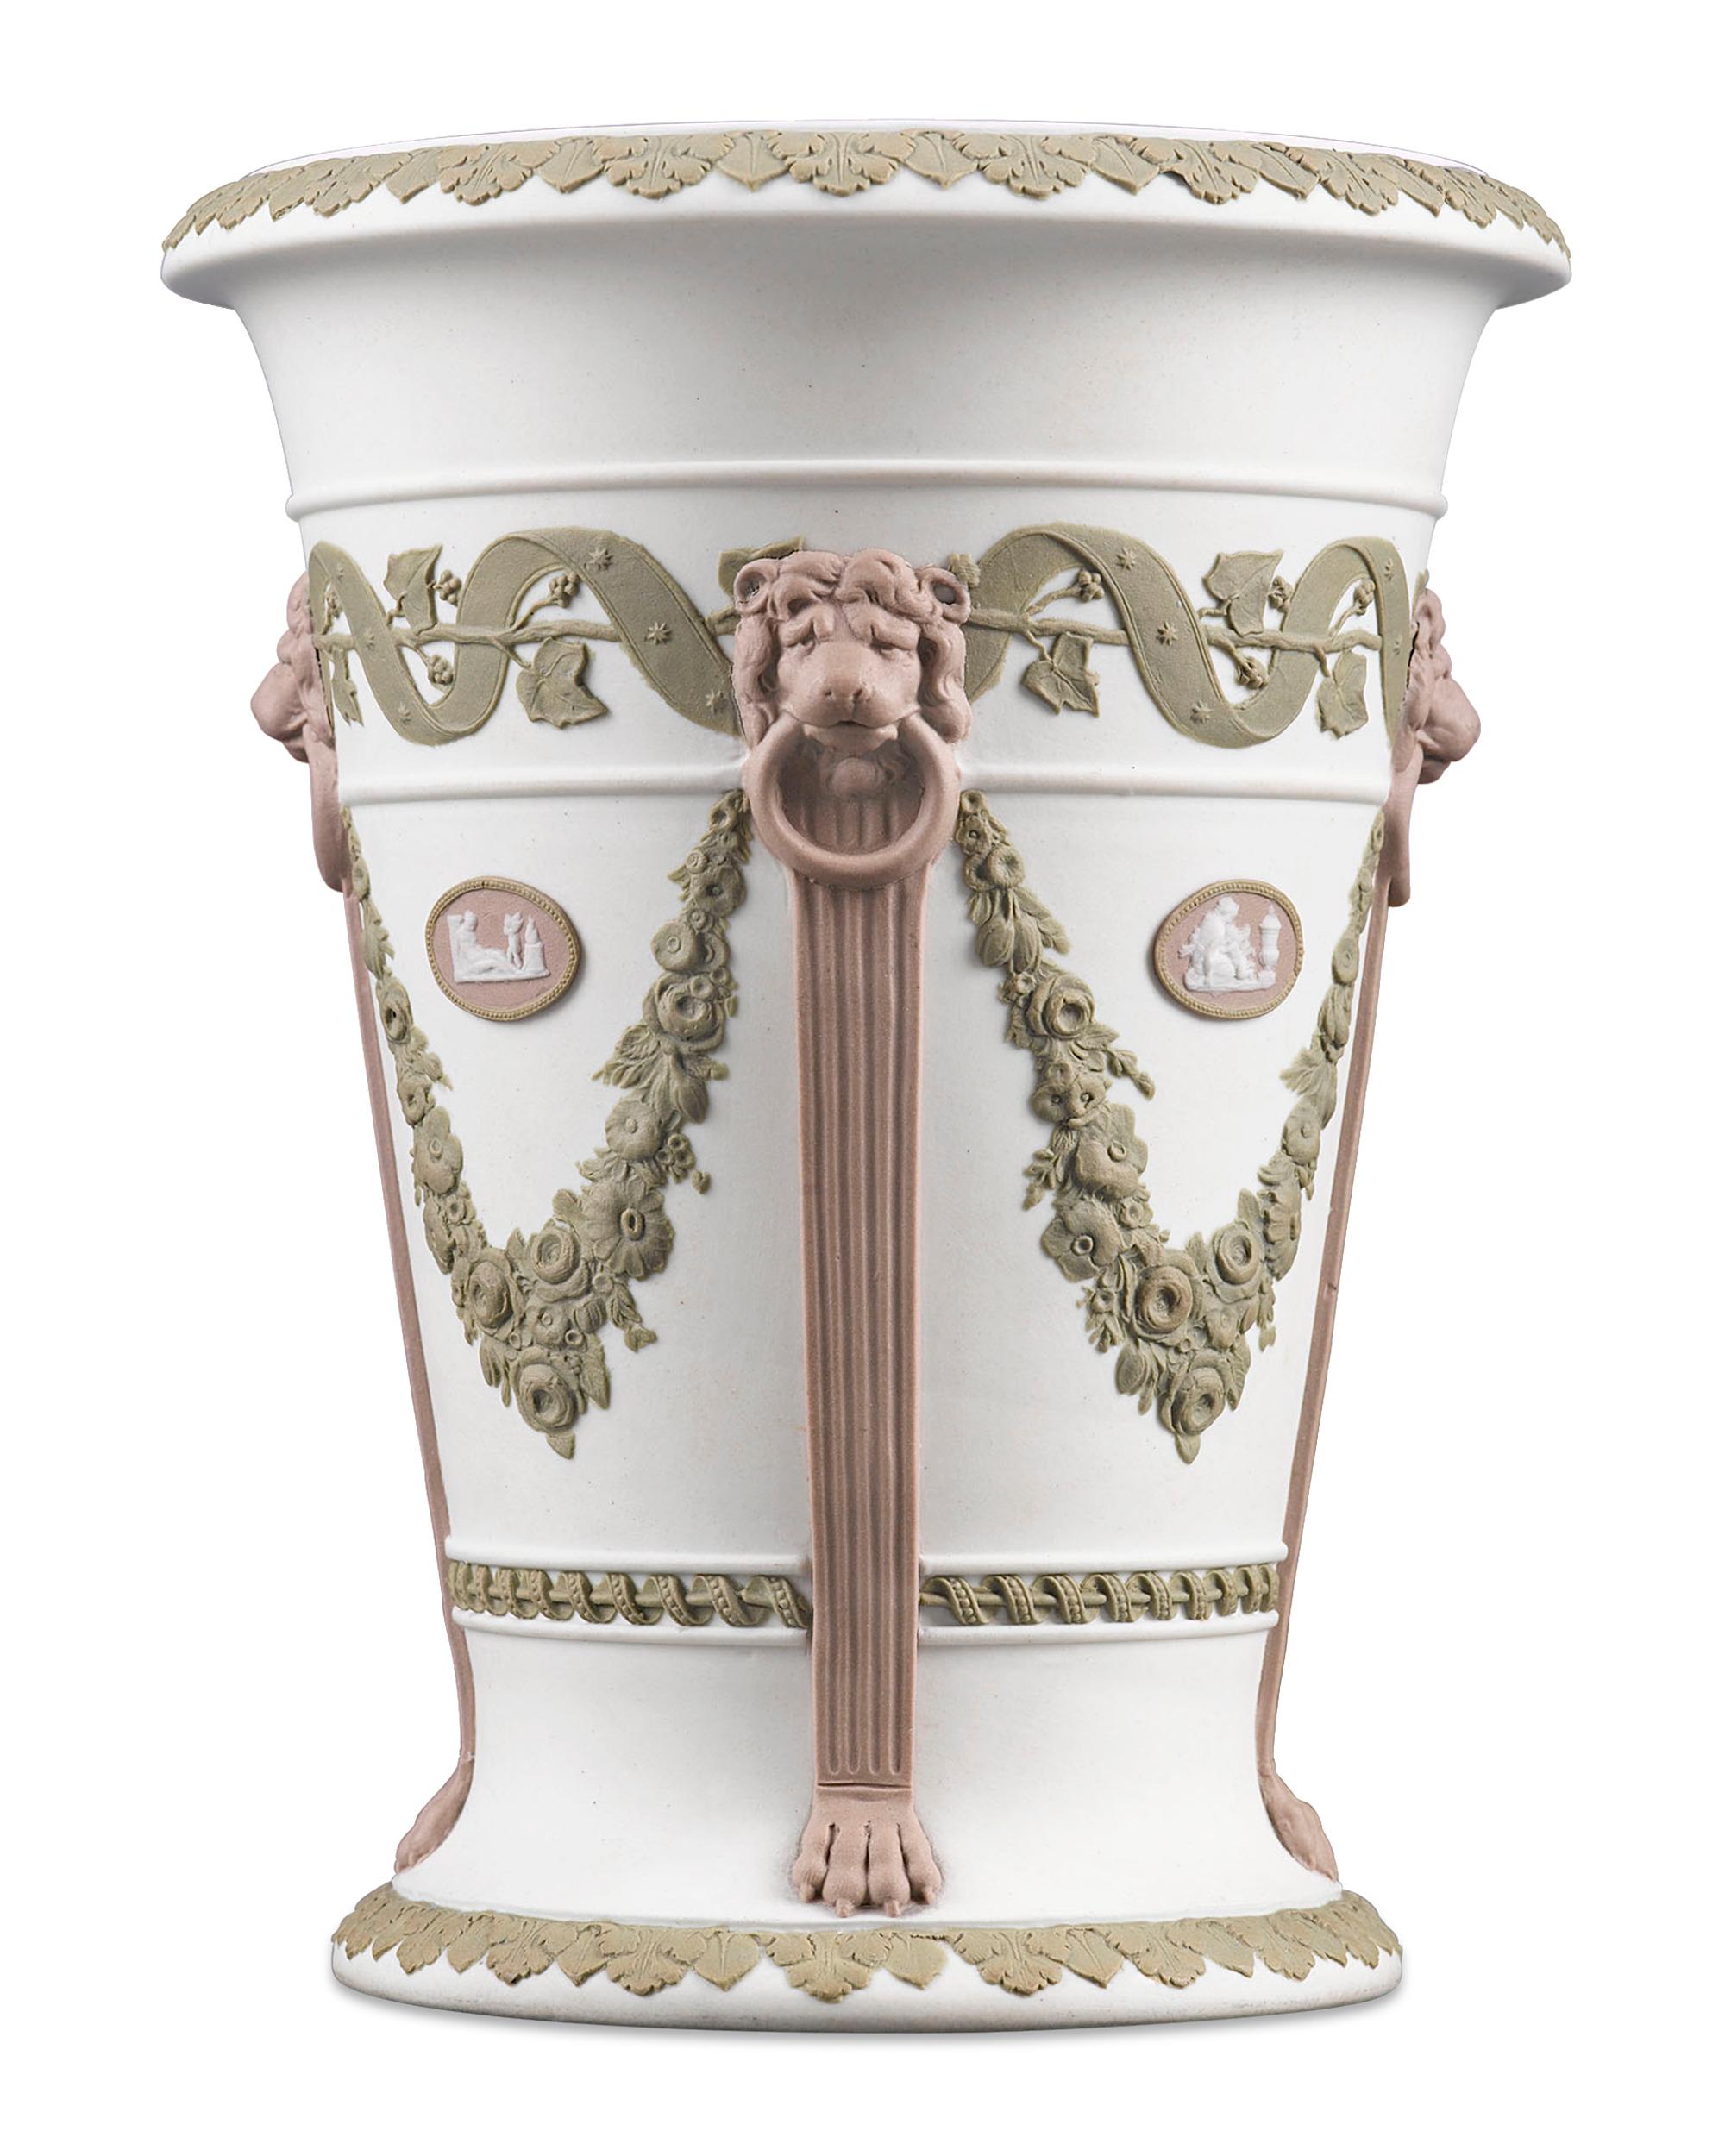 This sensational Wedgwood tricolor jasperware vase is truly a work of art. The exceptional and ornate vessel characterizes the Neoclassical Revival of the Georgian period. The gently flared design boasts lions’ head masks atop pilaster columns,